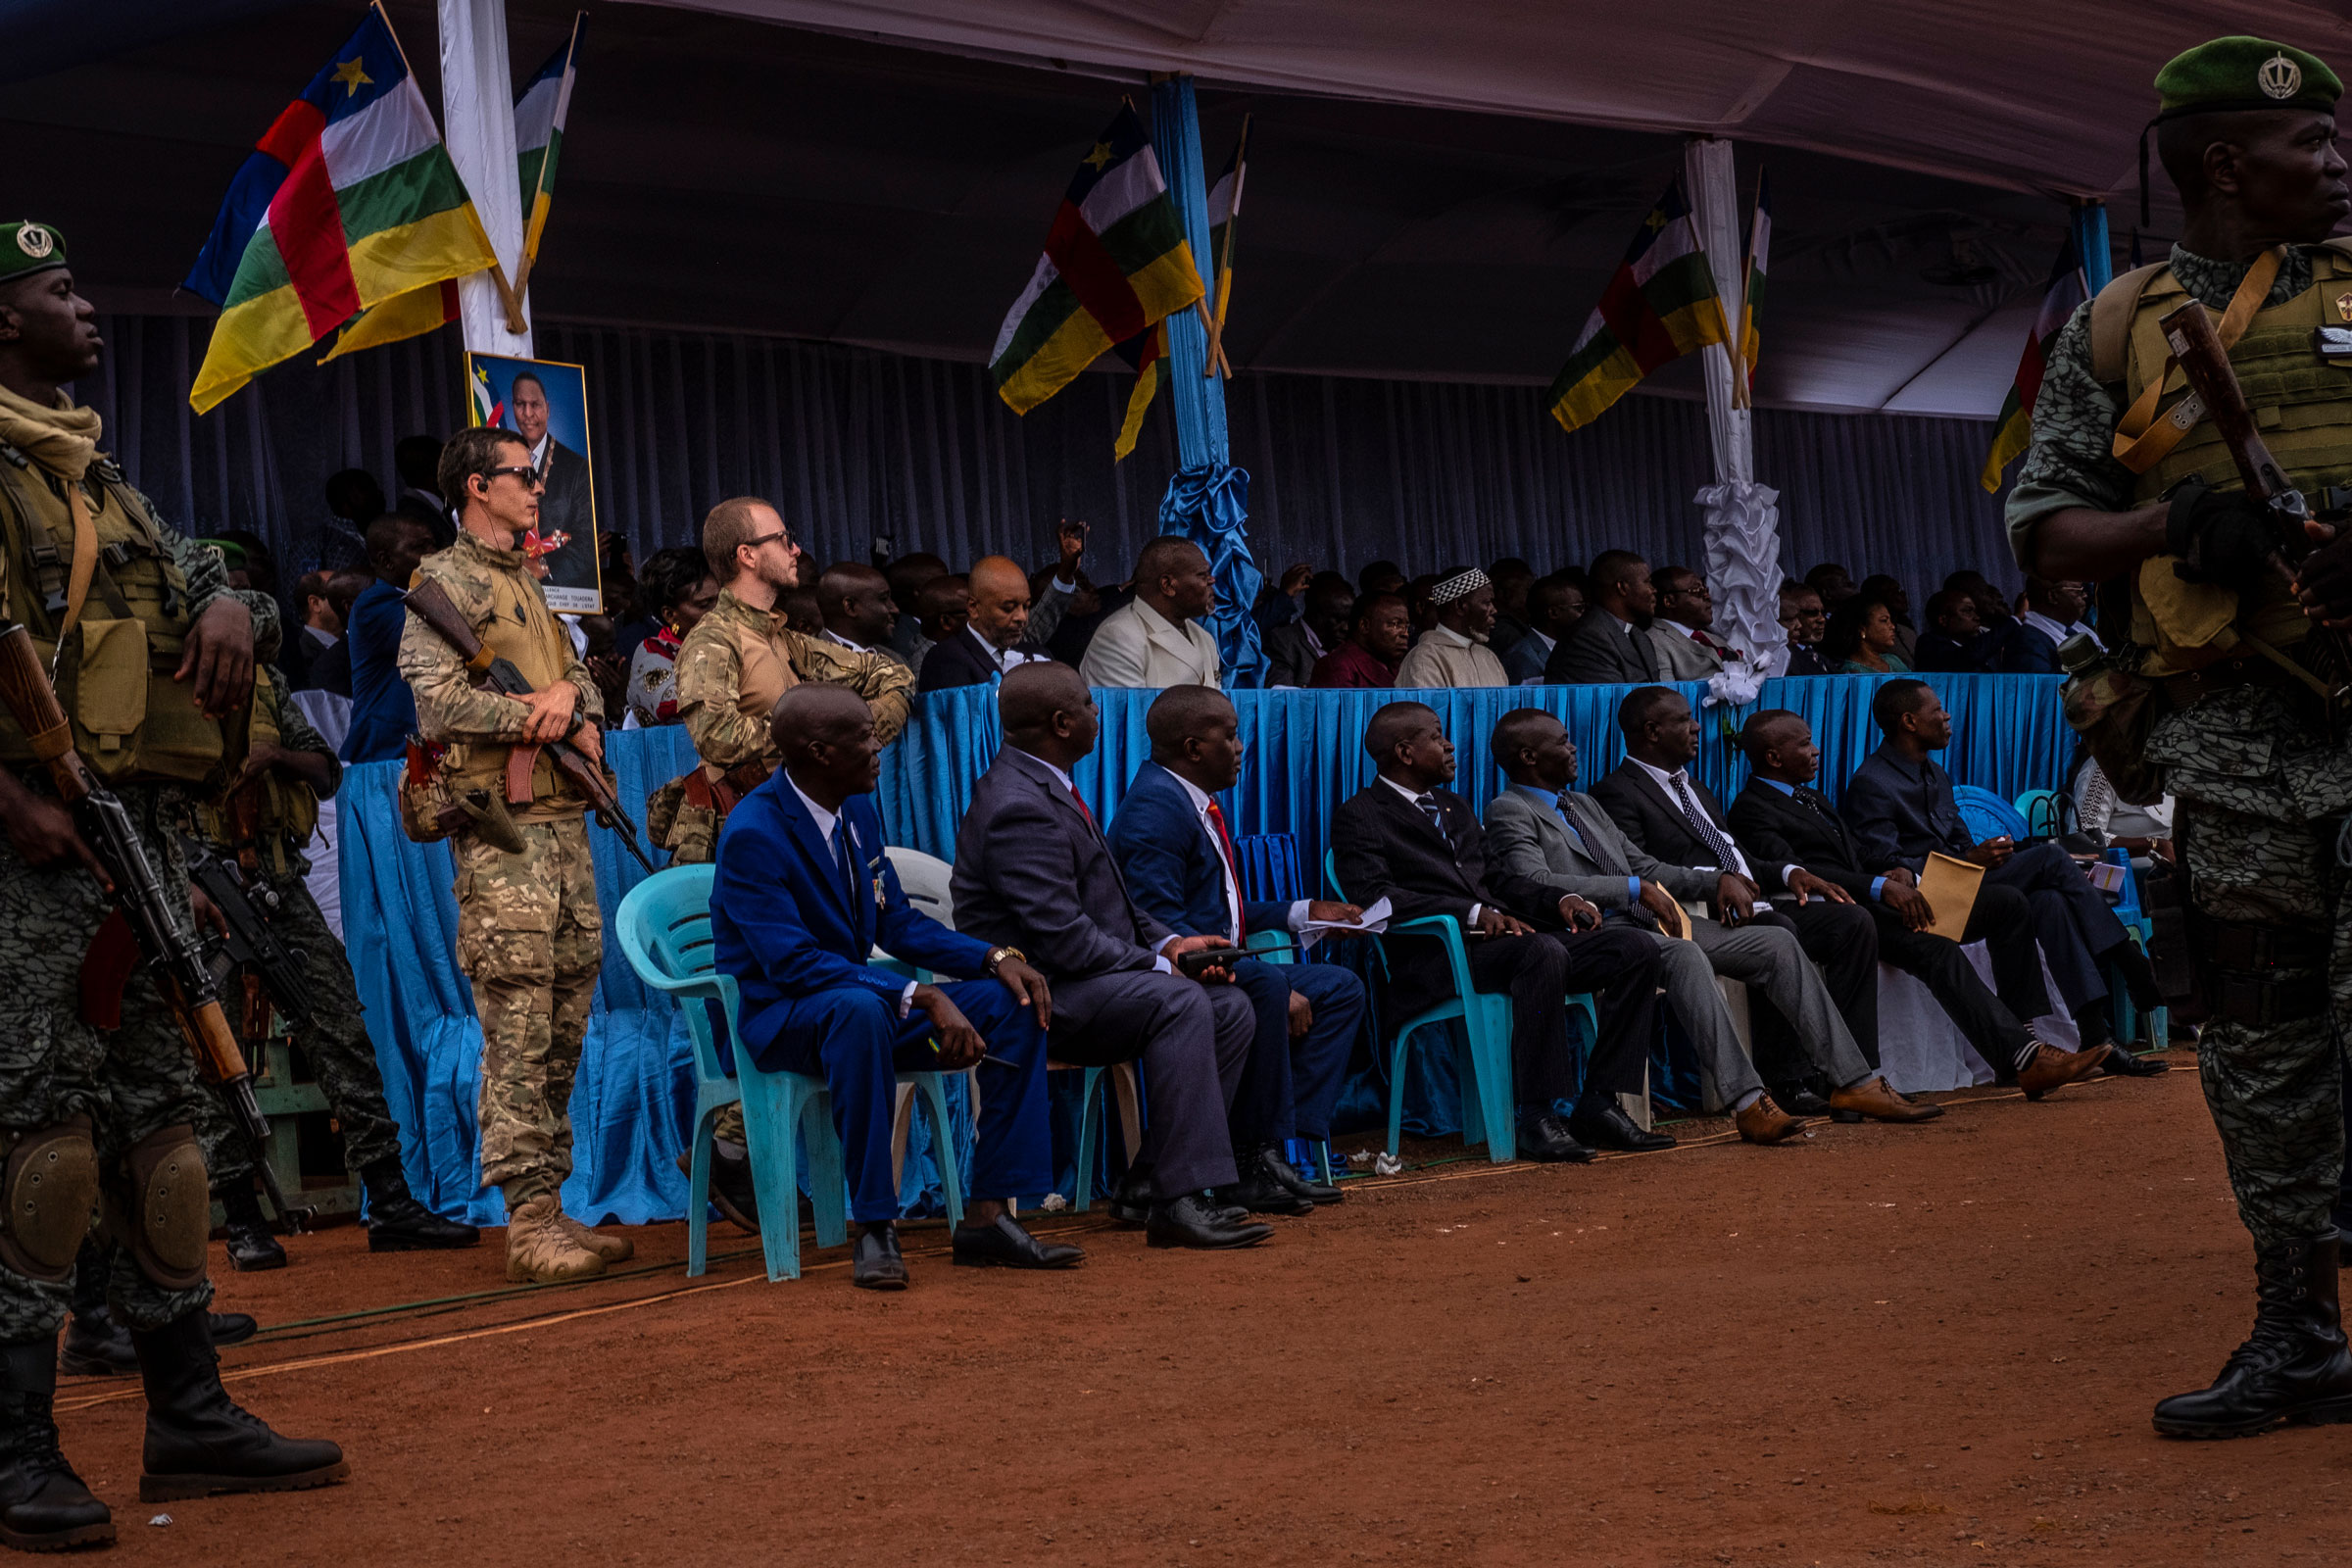 Russian mercenaries from the Wagner Group guard the VIP stand that the president sits in during Labour Day celebrations in Bangui, Central African Republic